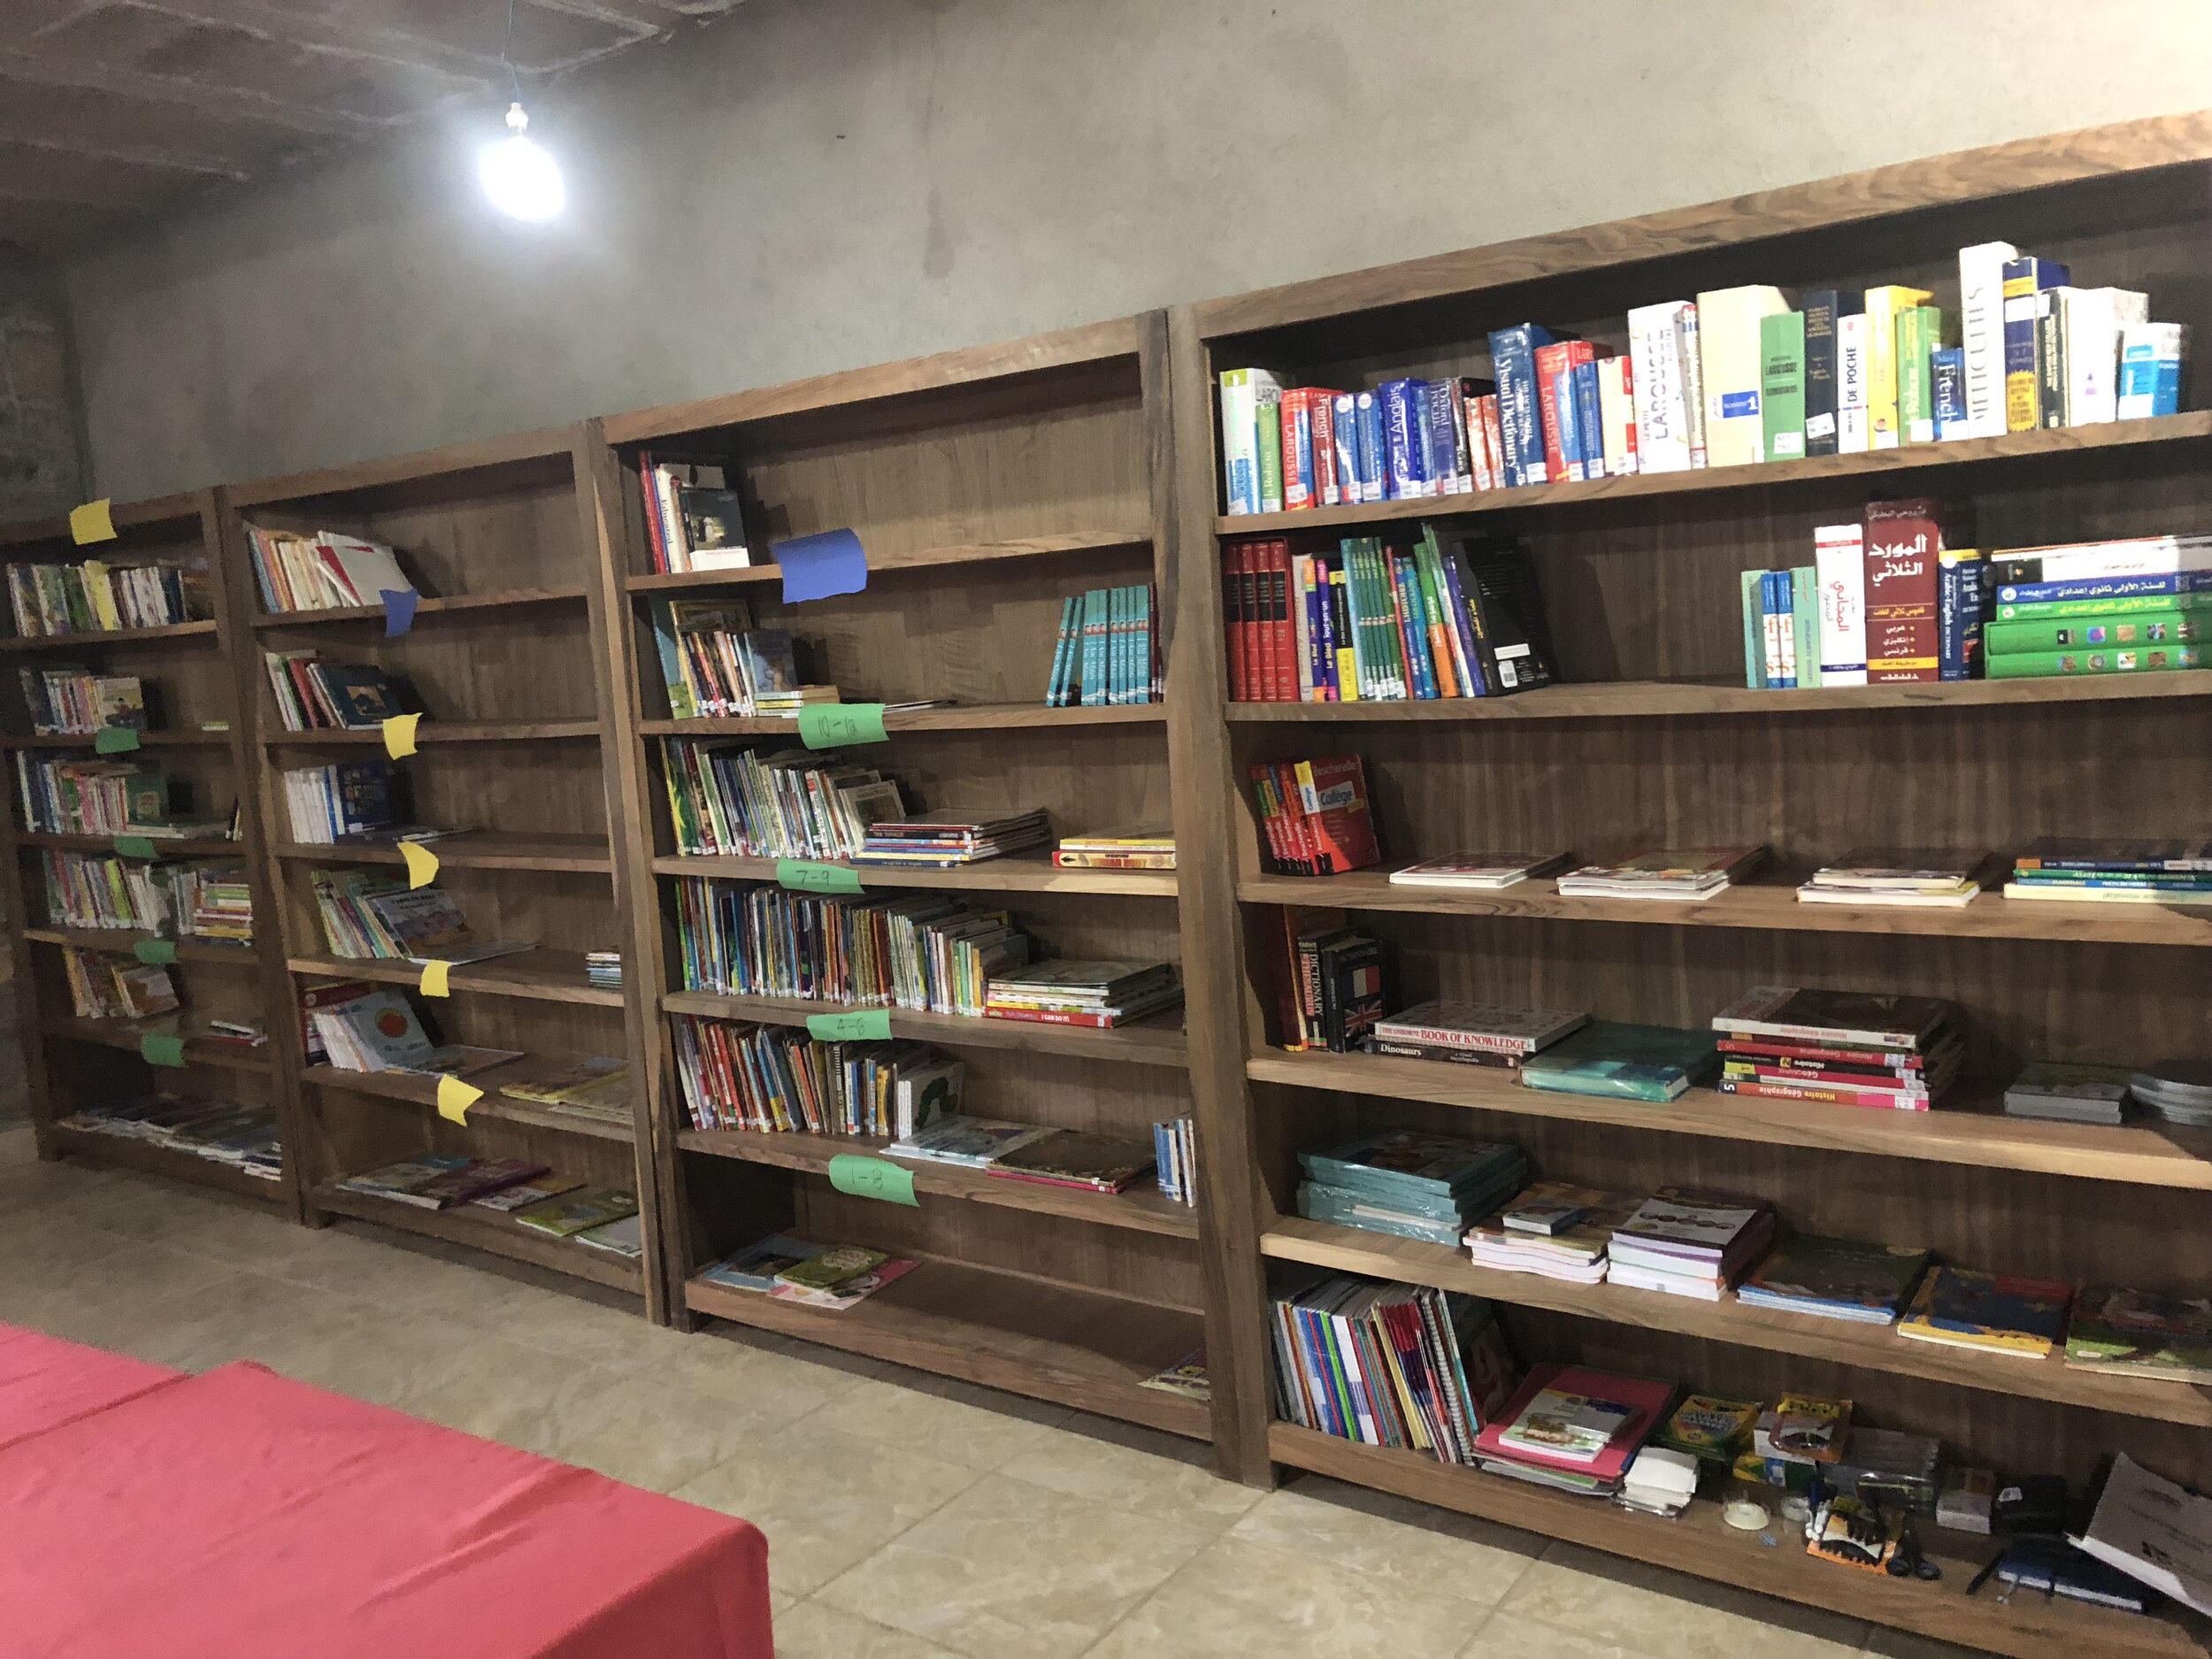  The library in Morocco being organized by language (French, Arabic, and English), reading level, and genre. 